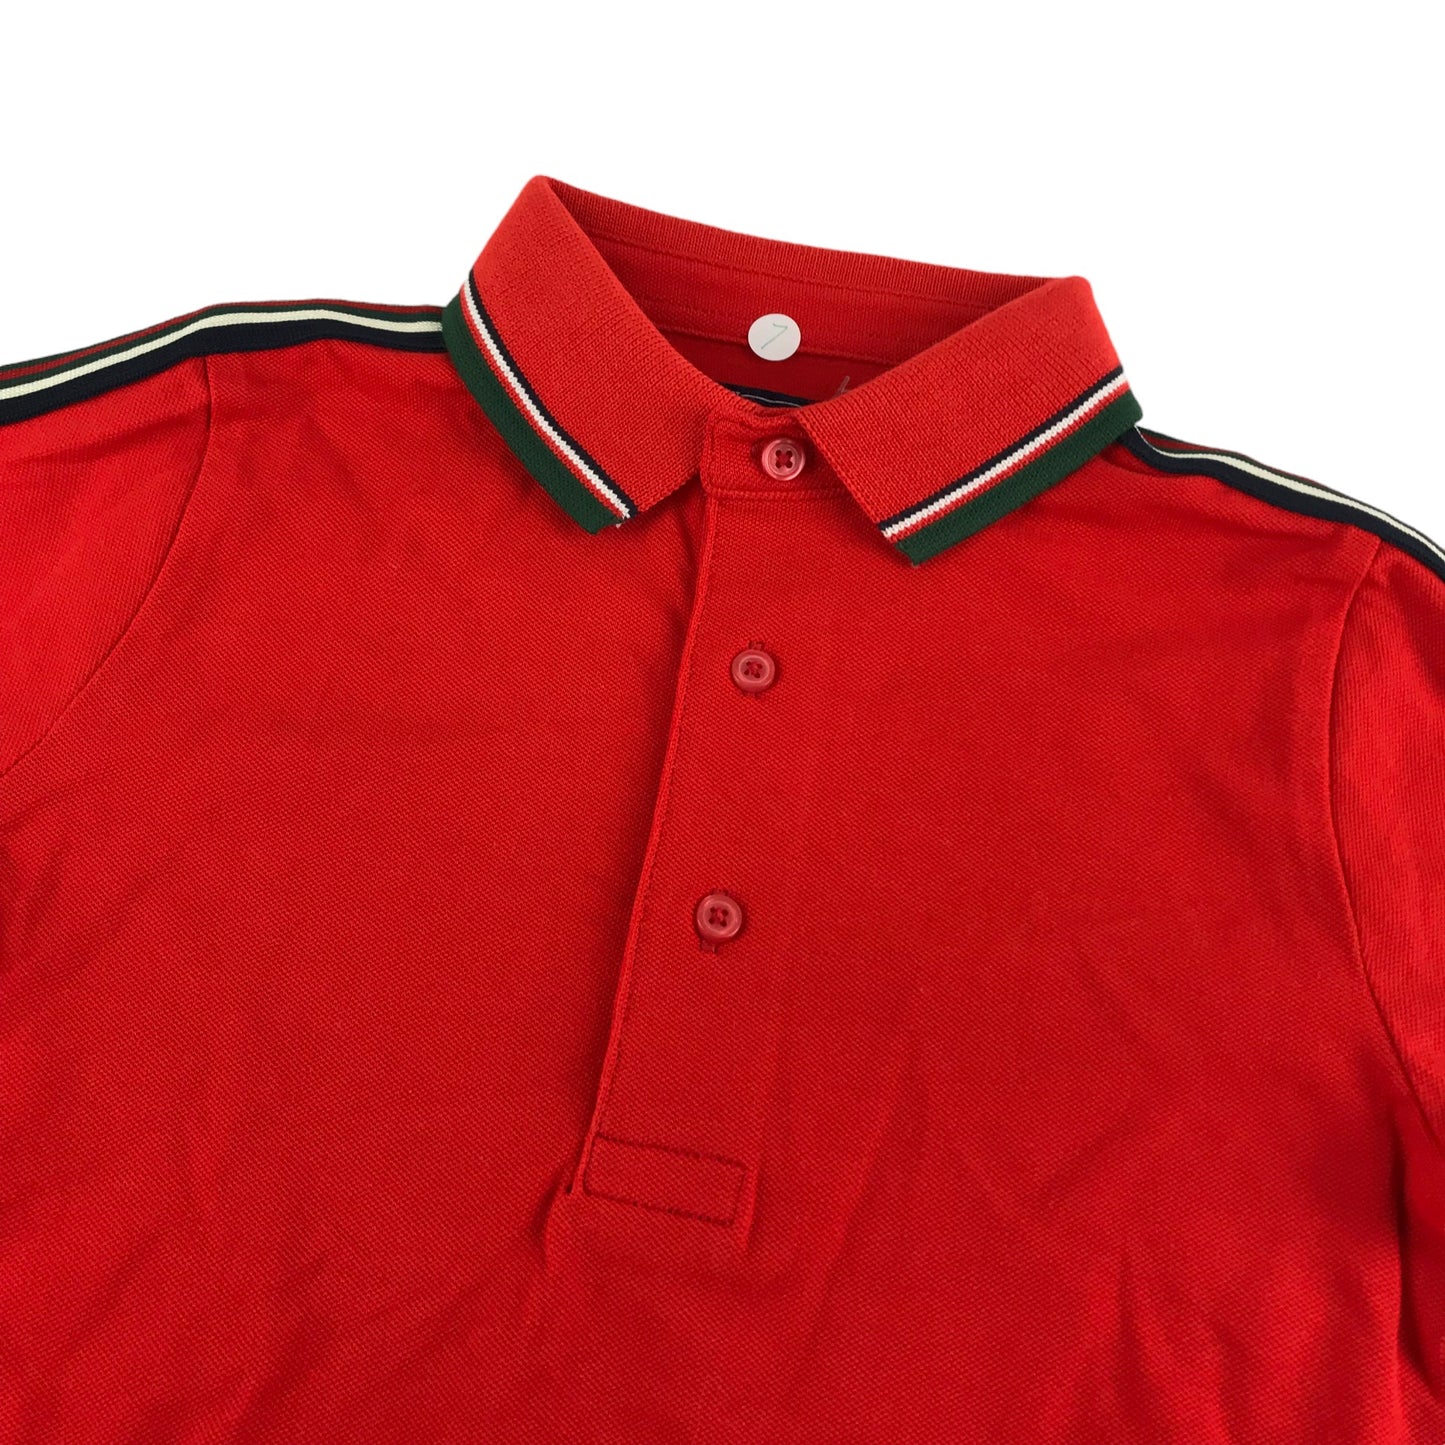 Next Polo Shirt Age 7 Red Short Sleeve